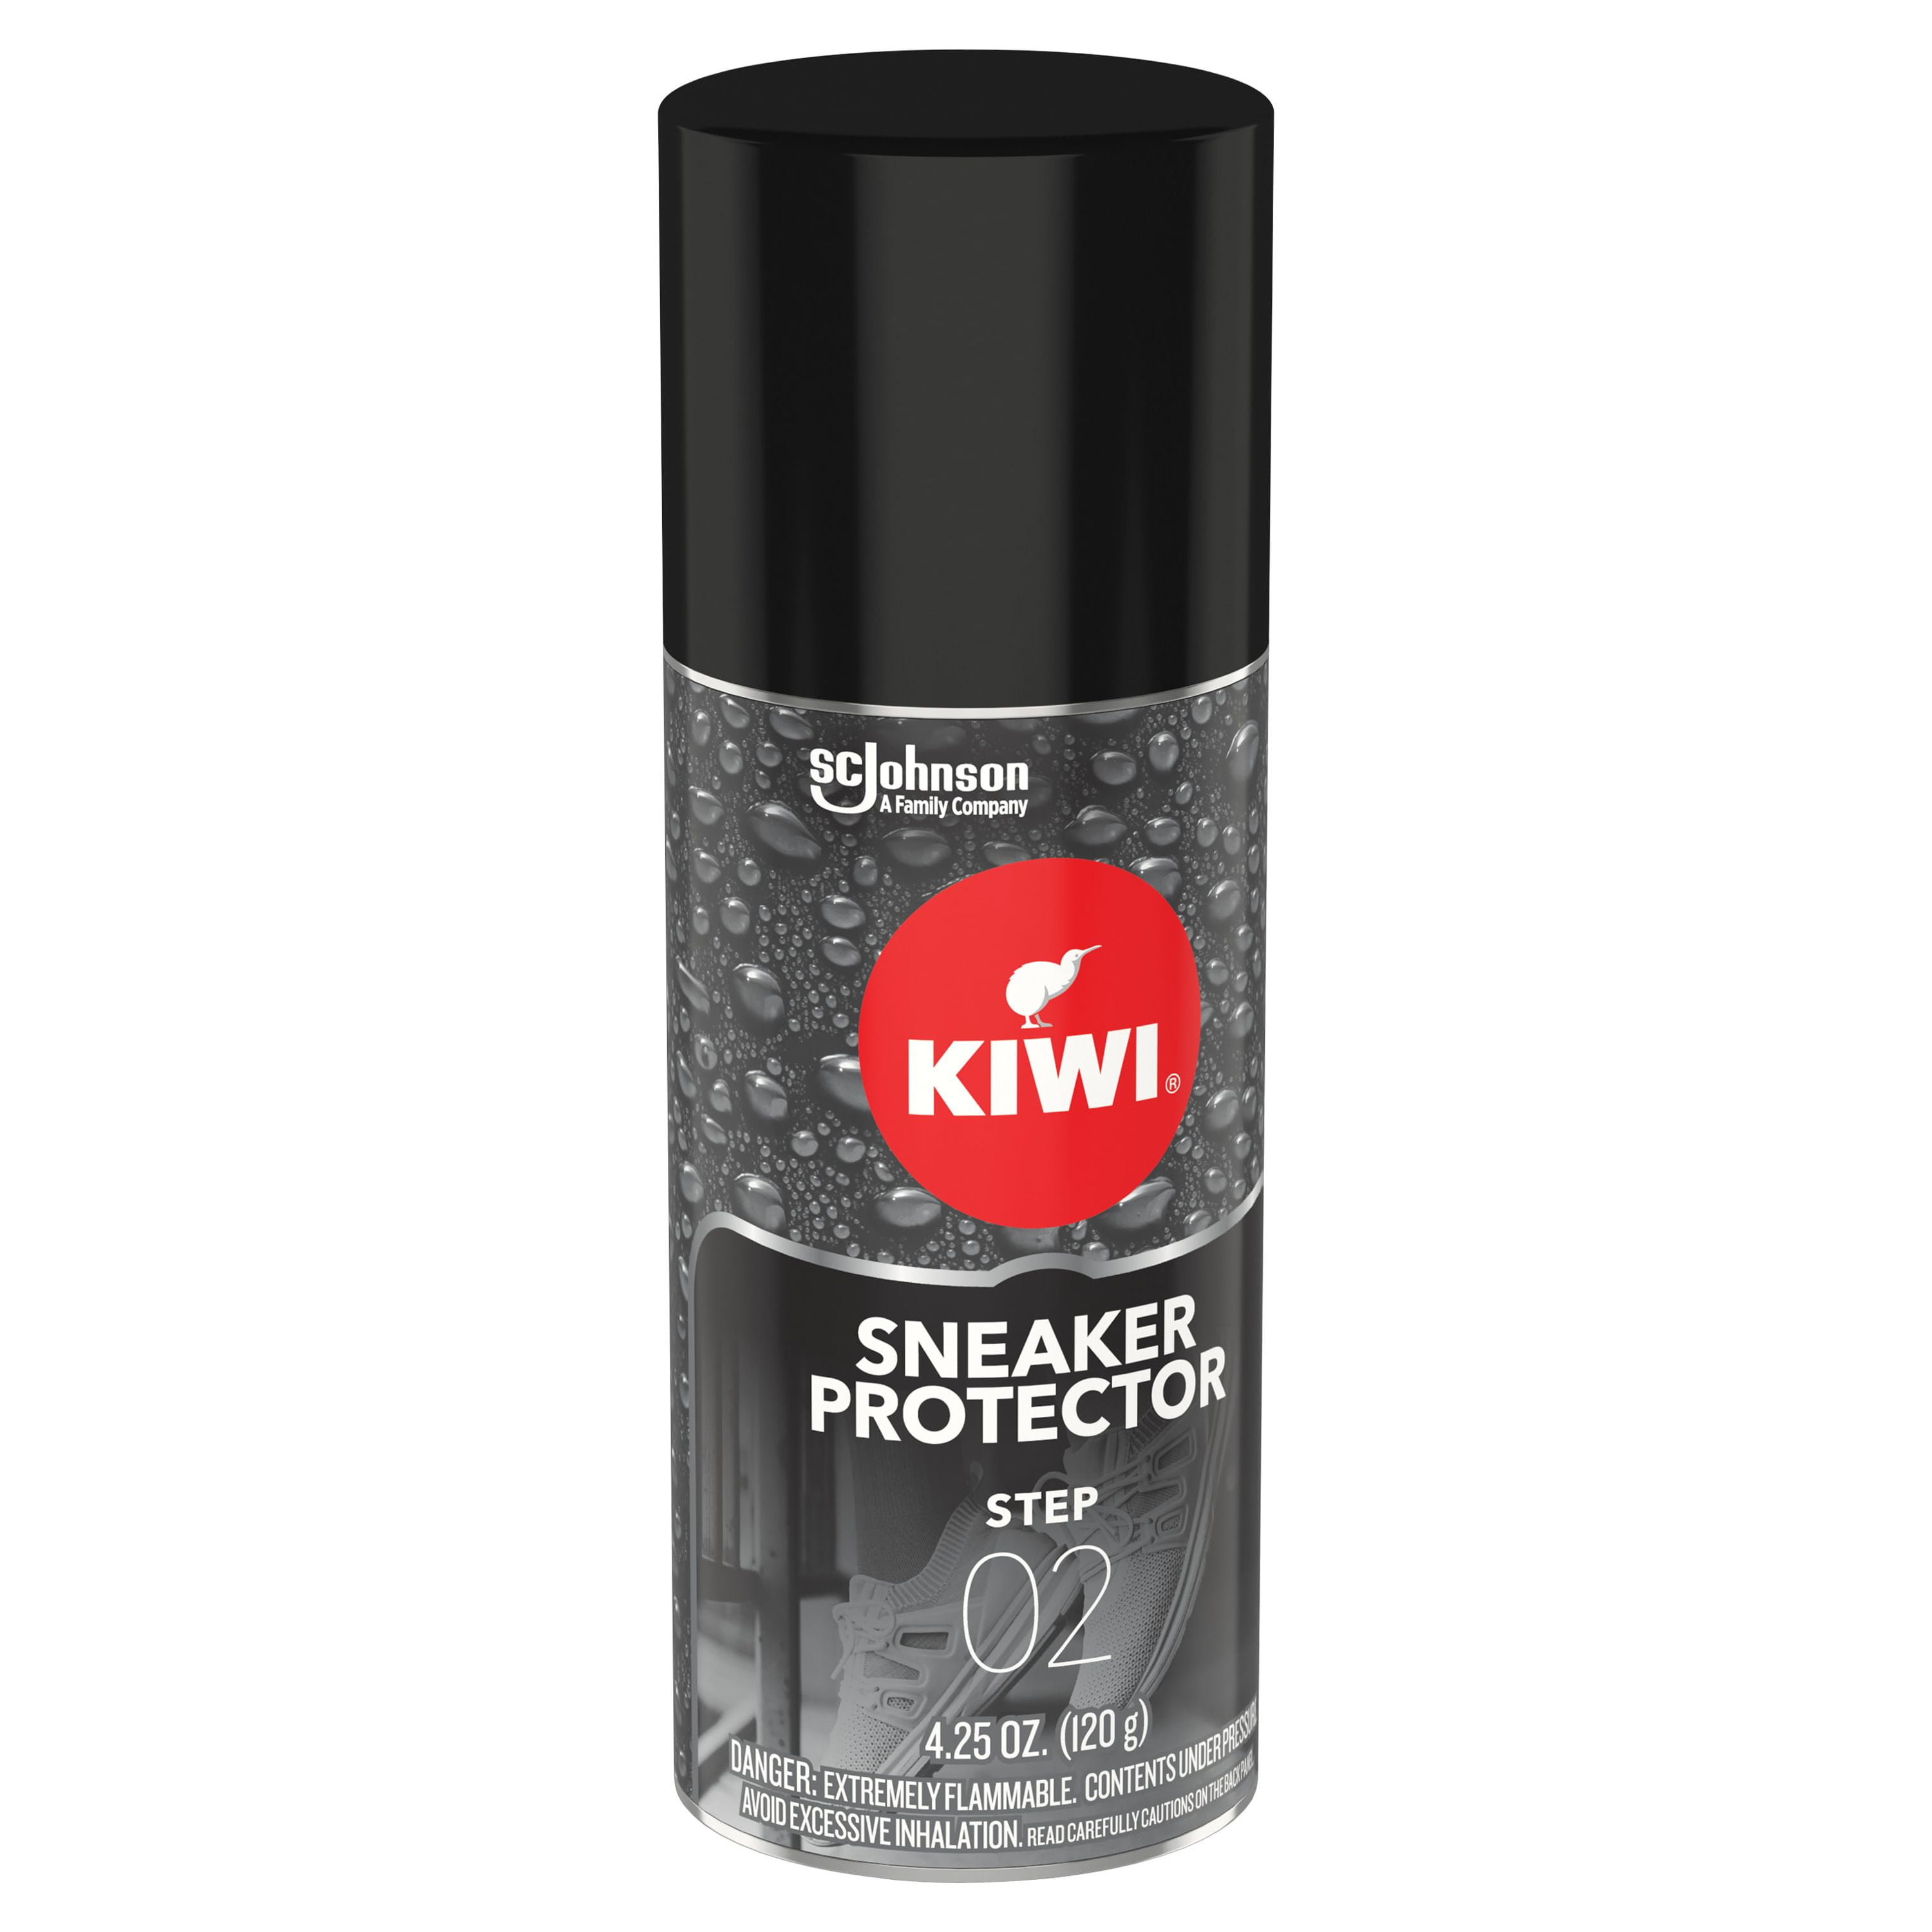 5 Best Shoe Protector Spray 2023 - Shoe Protector Sprays Review